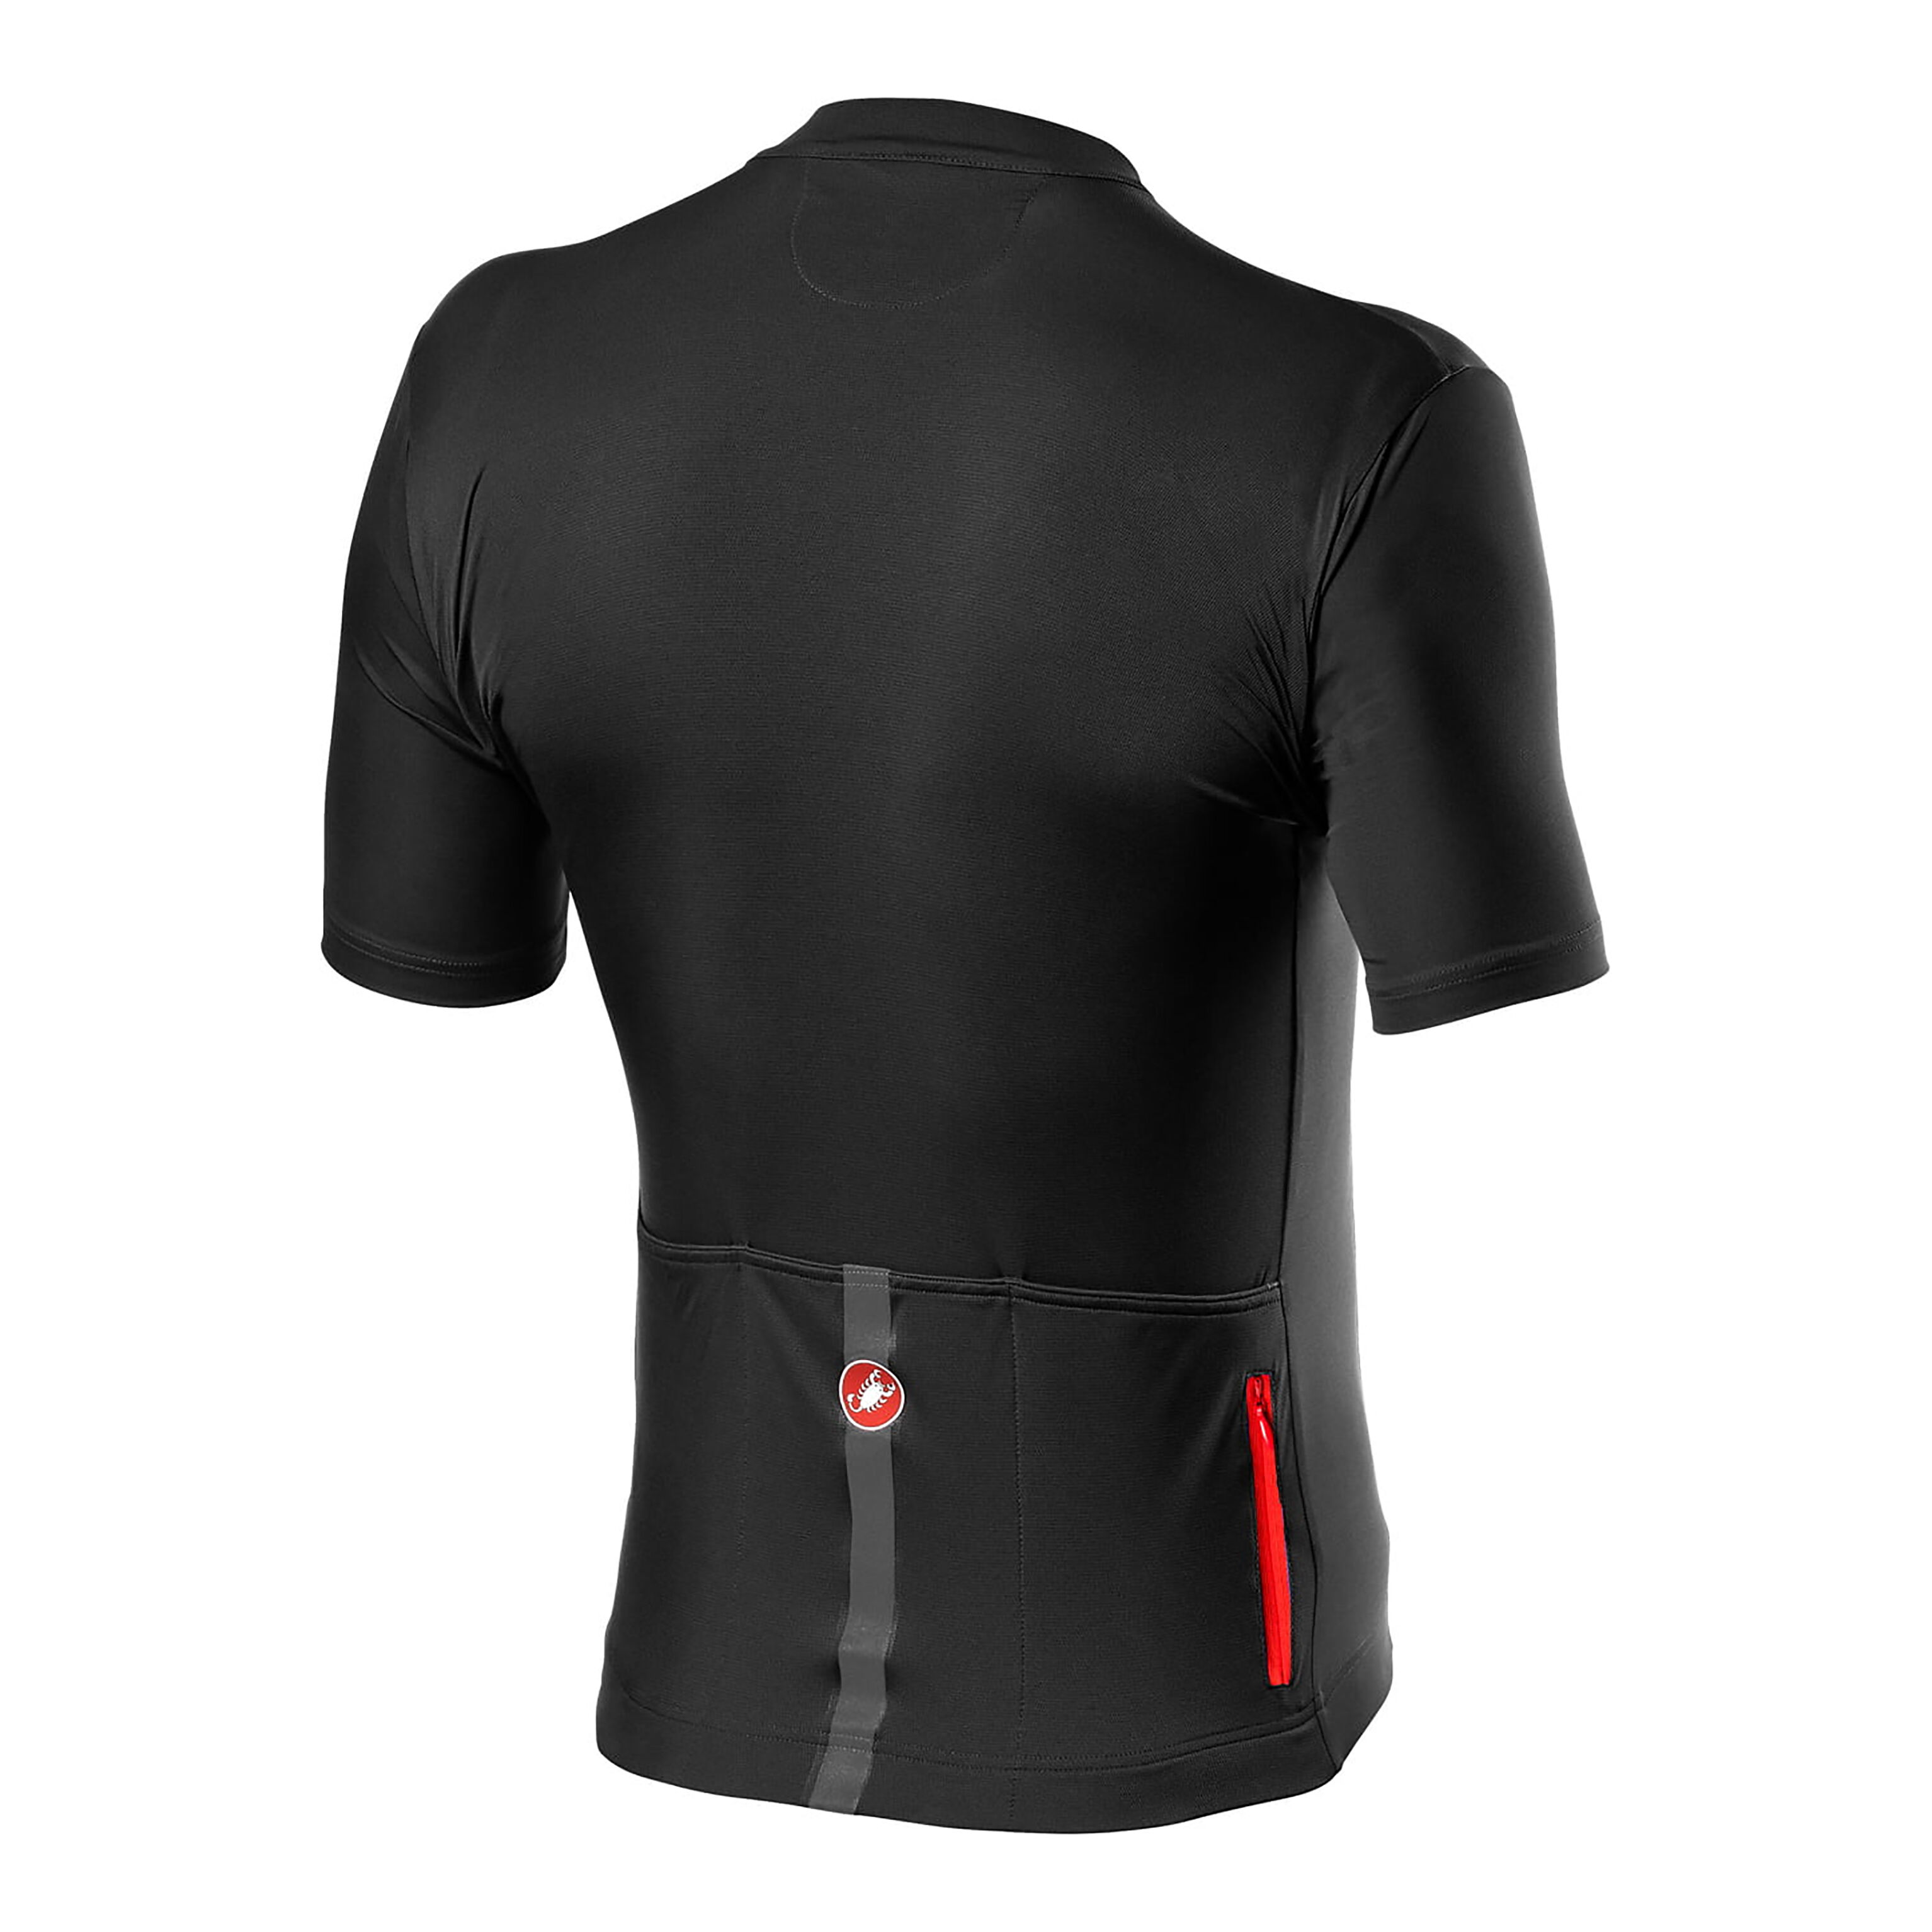 Castelli Classifica Short Sleeve Cycling Jersey - SS21 | Merlin Cycles